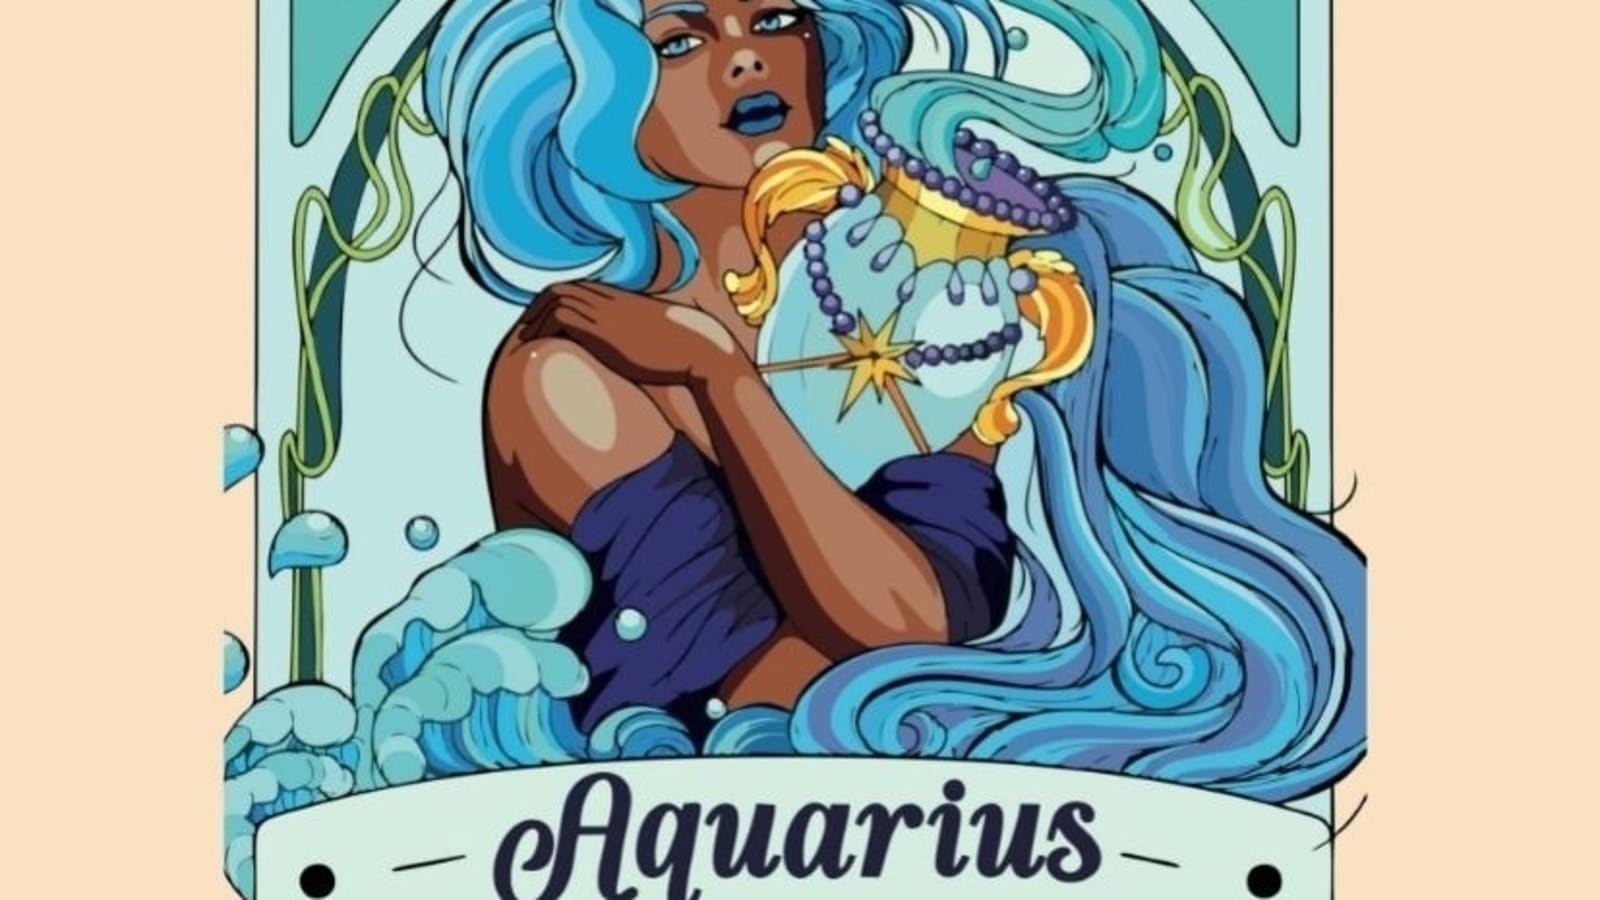 Aquarius Daily Horoscope for August 12, 2022: Love shall come your way ...